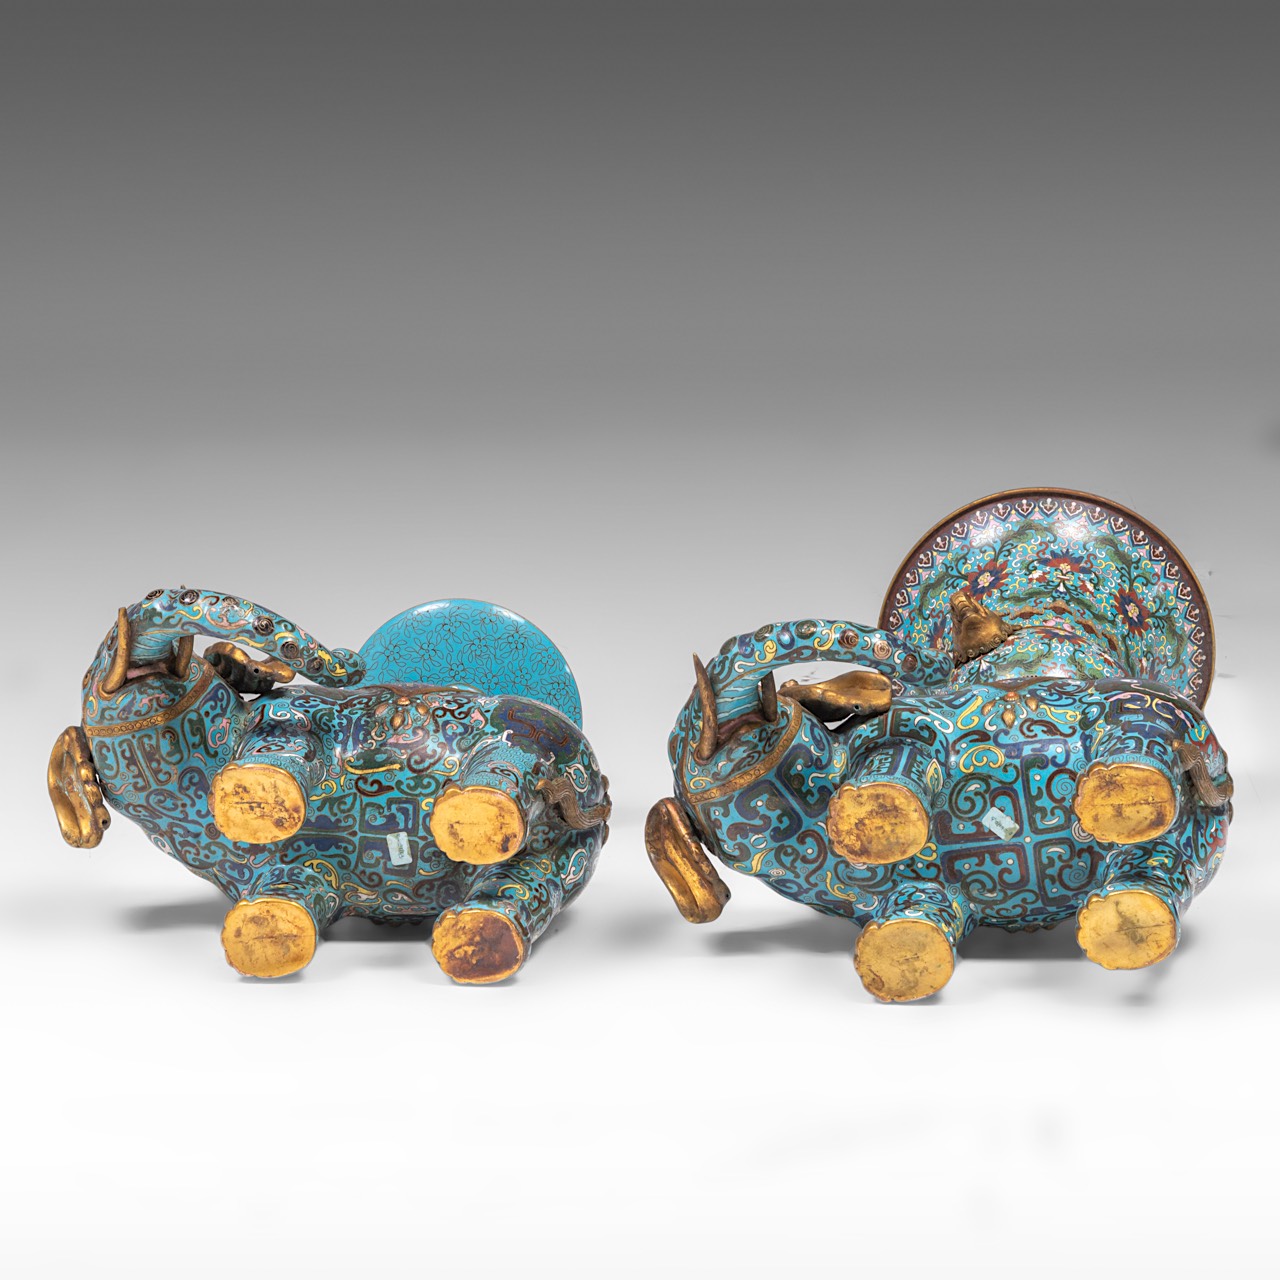 A Chinese five-piece semi-precious stone inlaid cloisonne garniture, late Qing/20thC, tallest H 58 - - Image 23 of 24